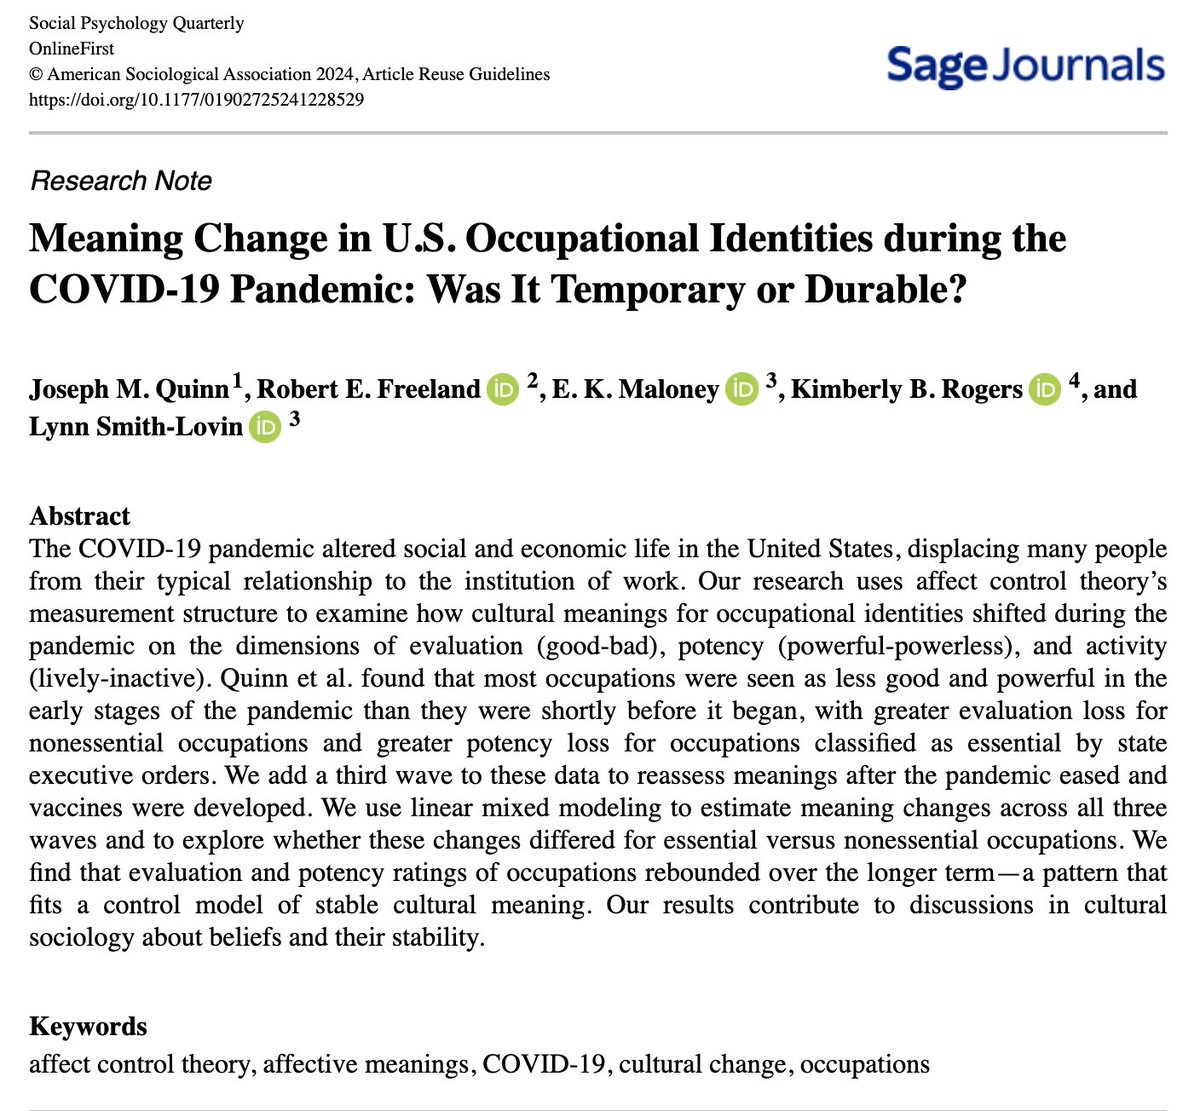 Check out our new OnlineFirst article! 'Meaning Change in U.S. Occupational Identities during the COVID-19 Pandemic: Was It Temporary or Durable?' in #SPQ! @ASASocPsych @kimberlybrogers journals.sagepub.com/doi/full/10.11…